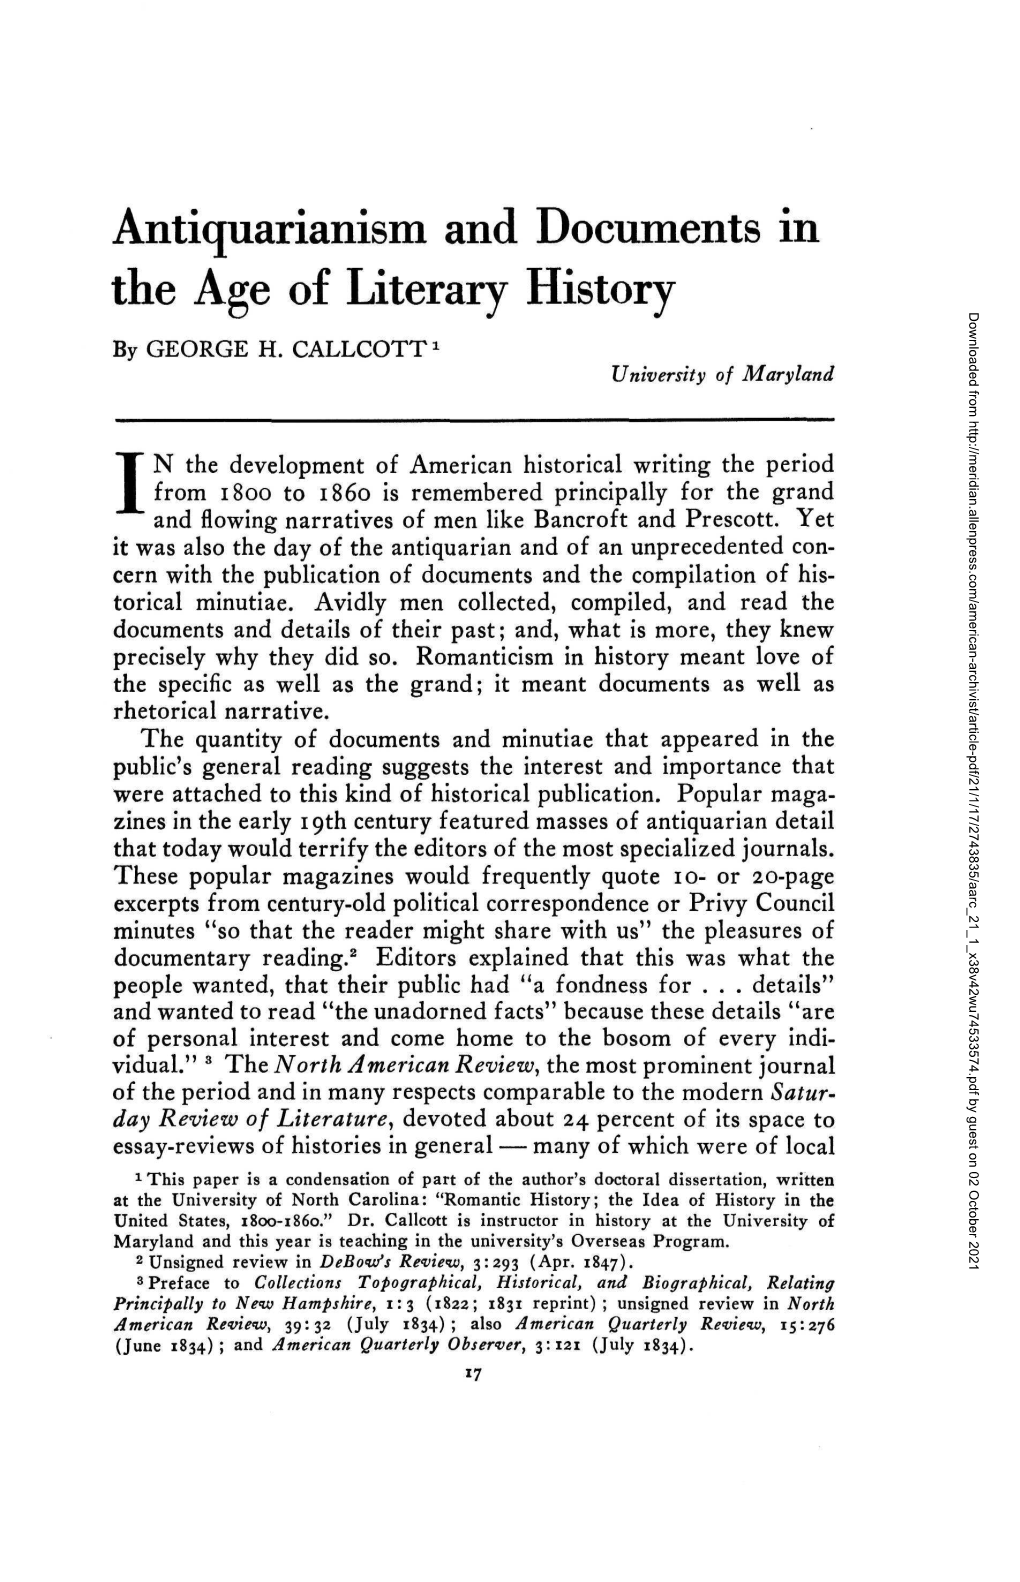 Antiquarianism and Documents in the Age of Literary History